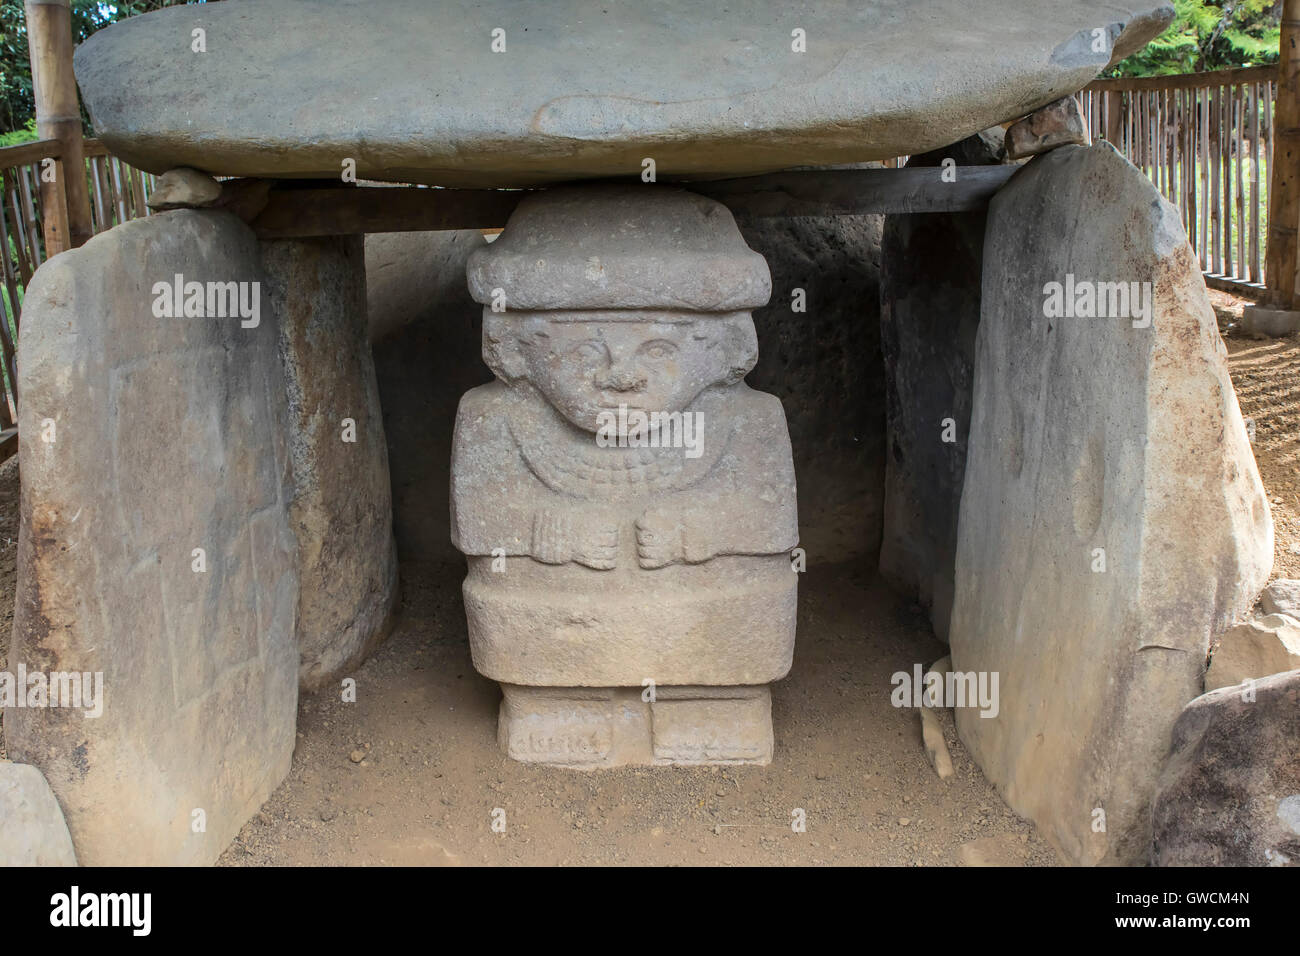 Complex of pre-Columbian megalithic funerary monuments and statuary, burial mounds, terraces, funerary structures, stone statuar Stock Photo